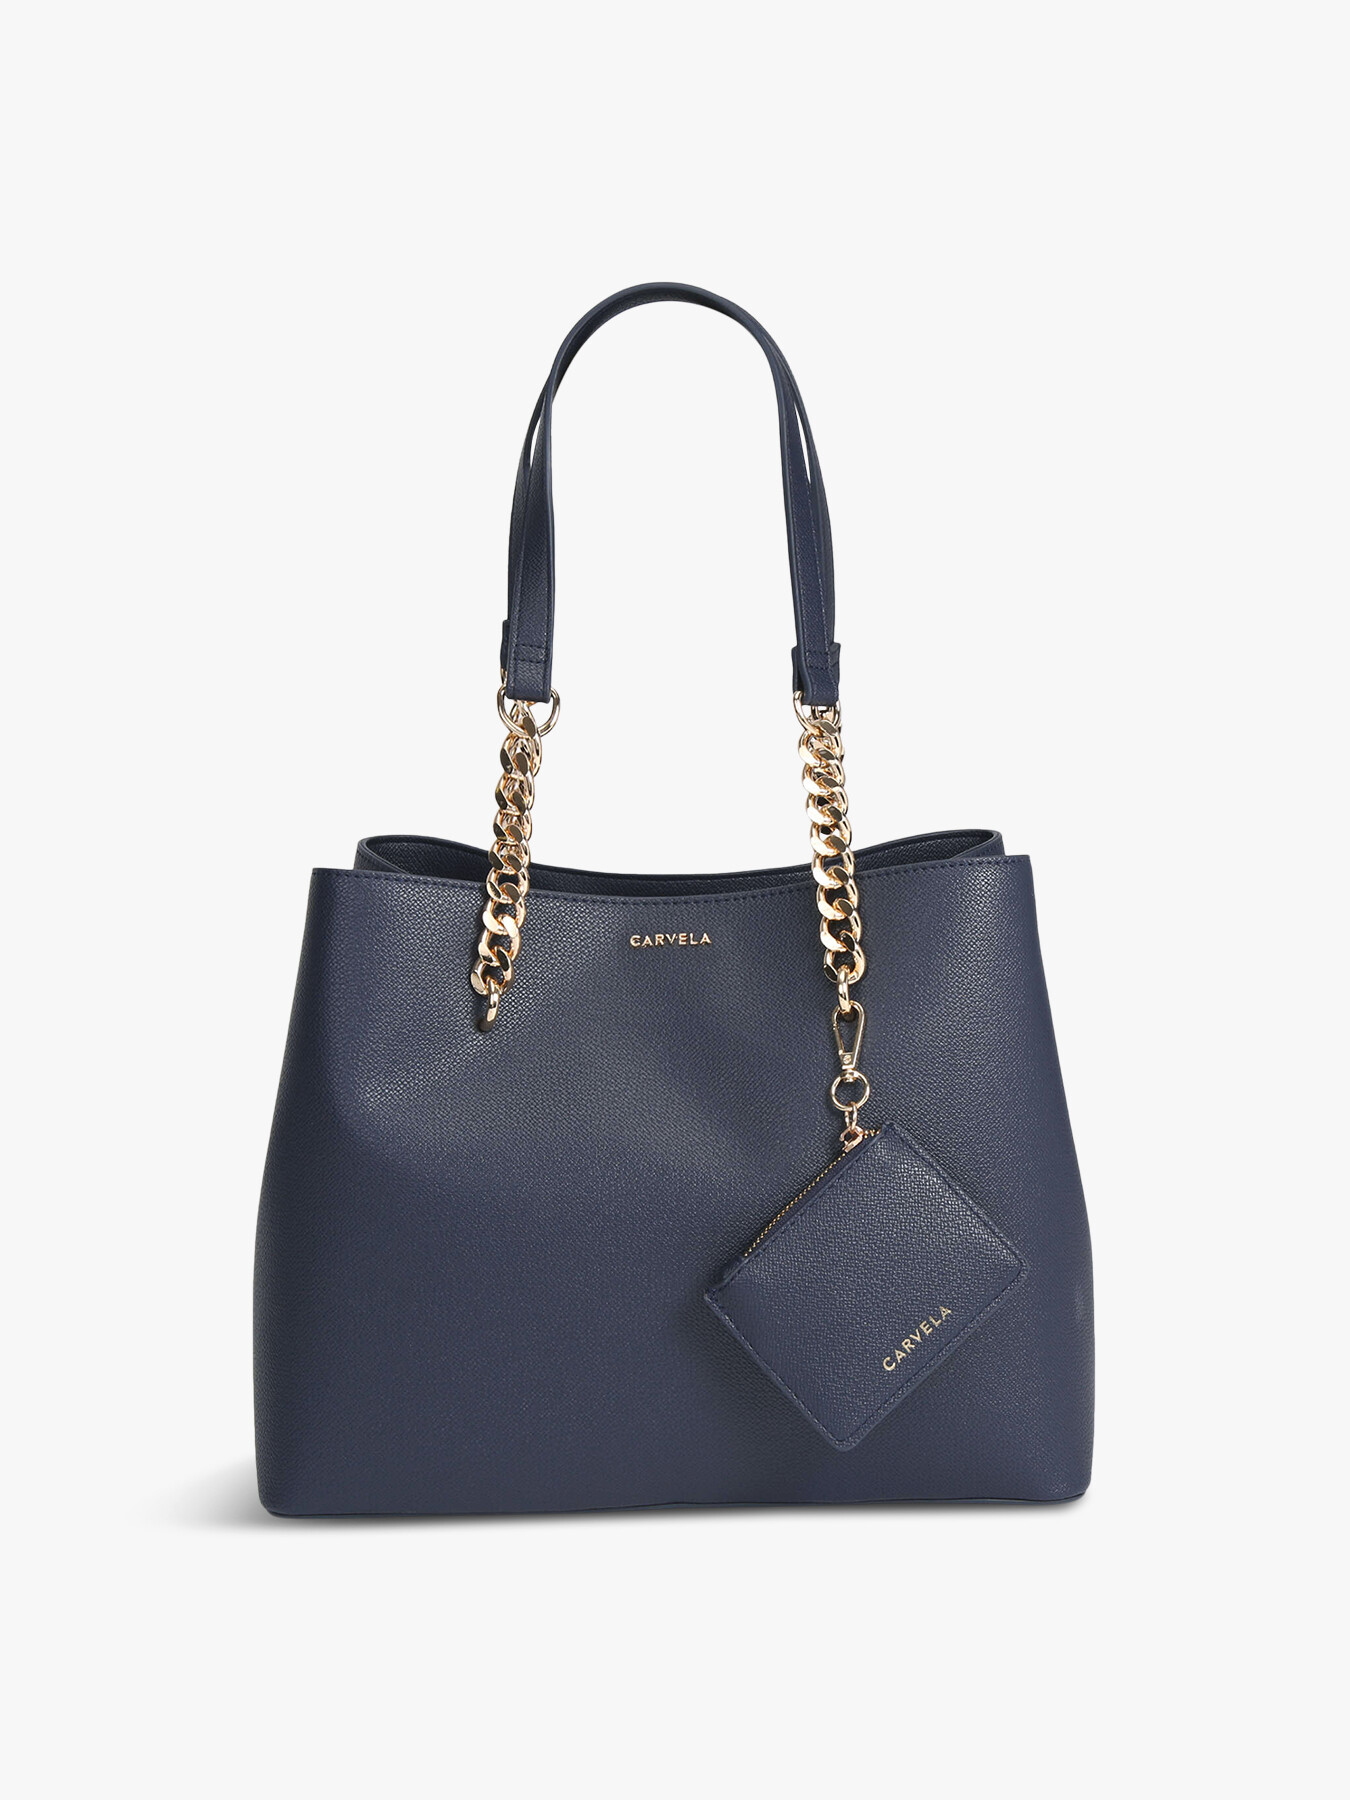 Buy Carvela Black Structured Tote Bag for Women Online | The Collective